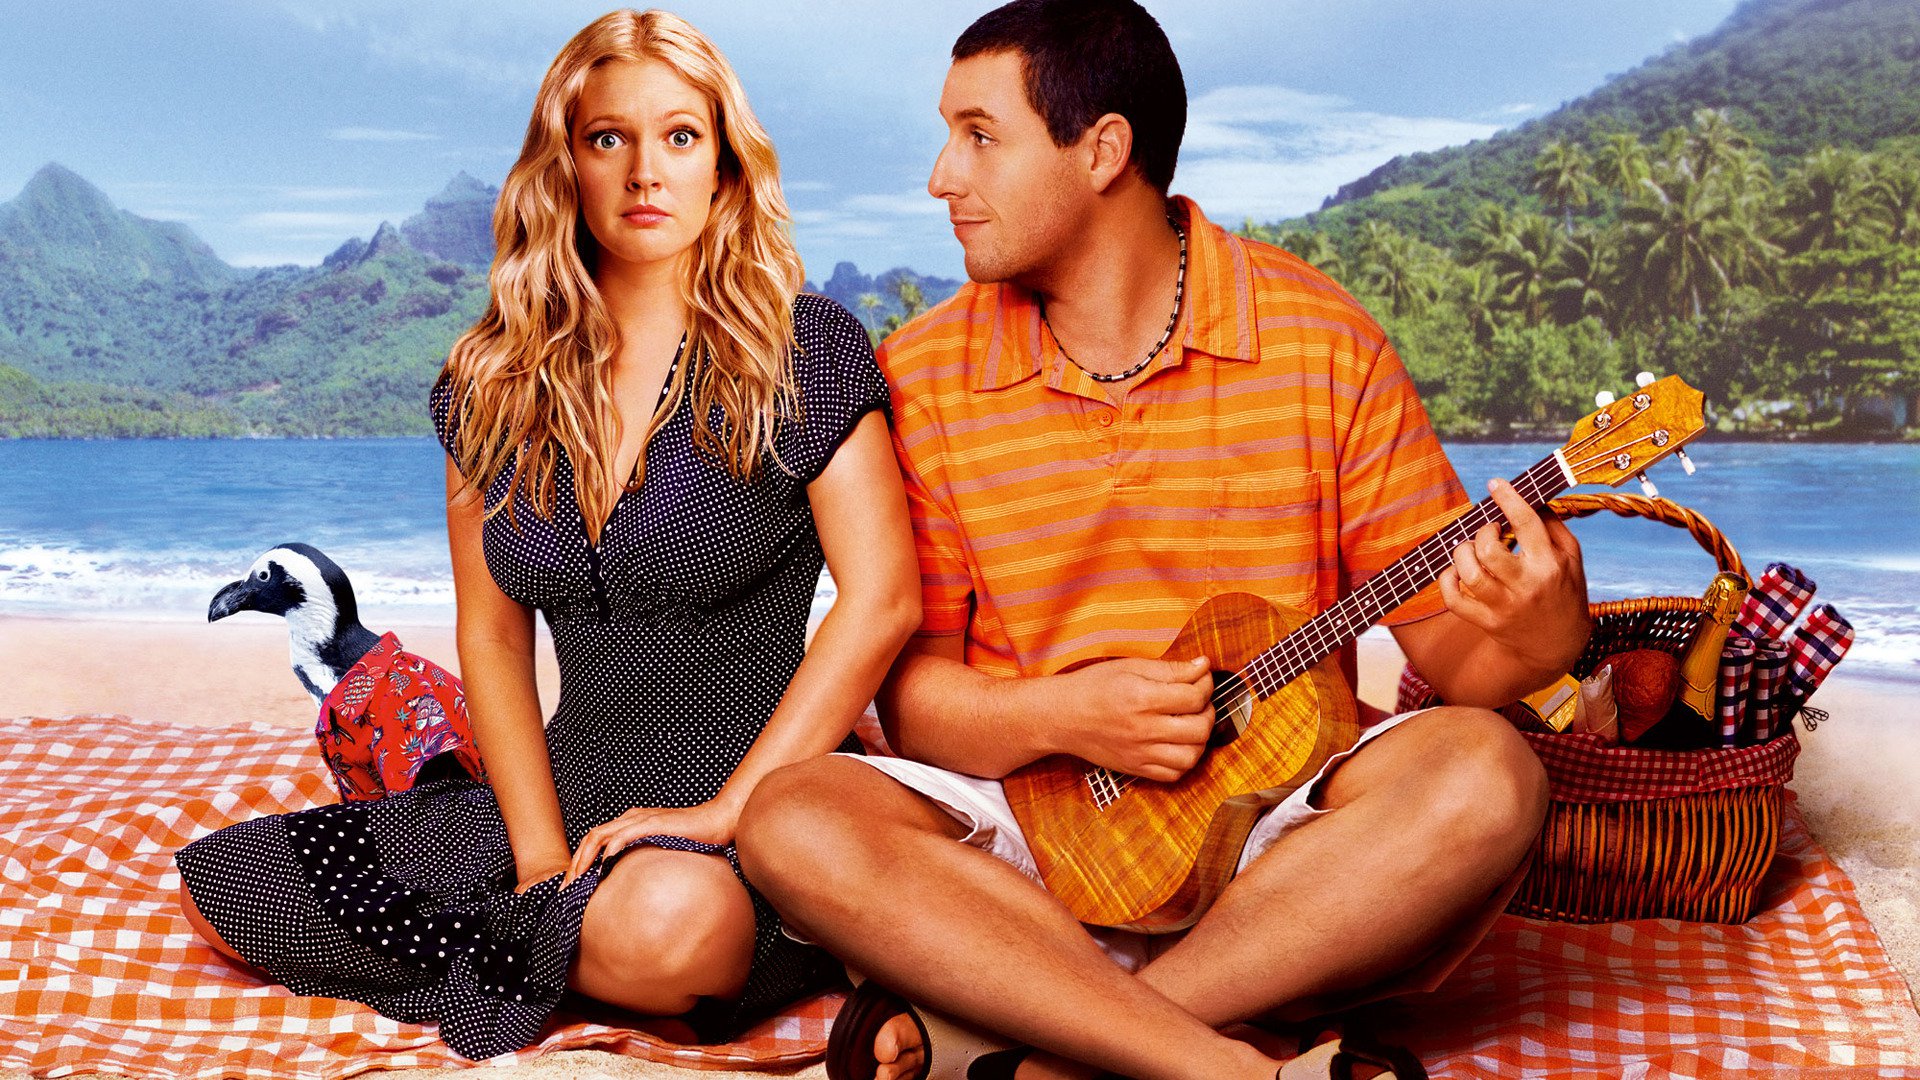 50 first dates 2004